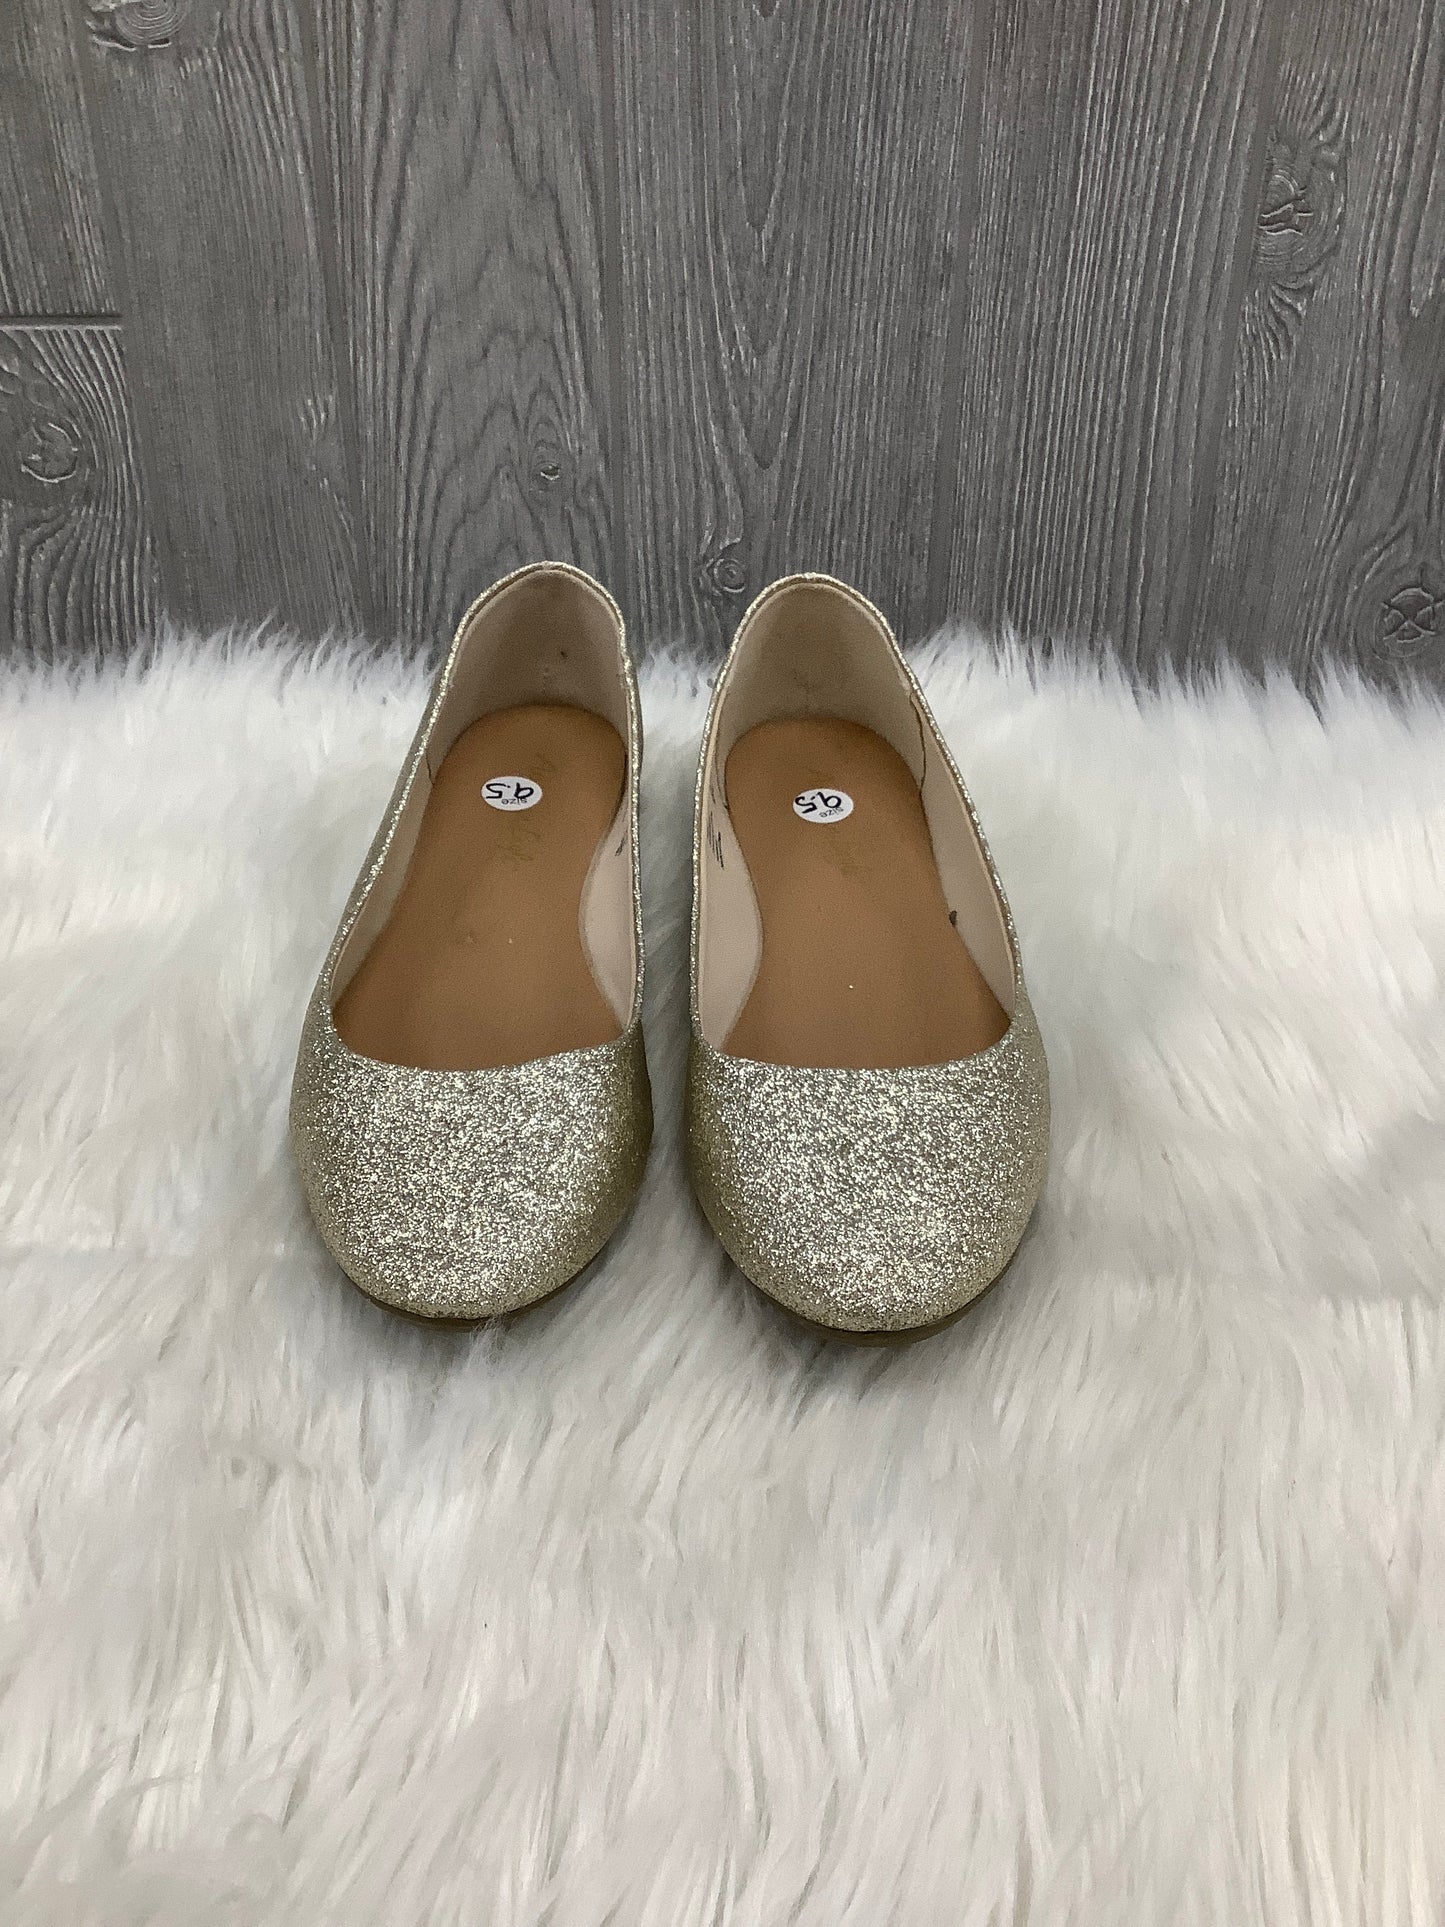 Shoes Flats Ballet By American Eagle  Size: 10